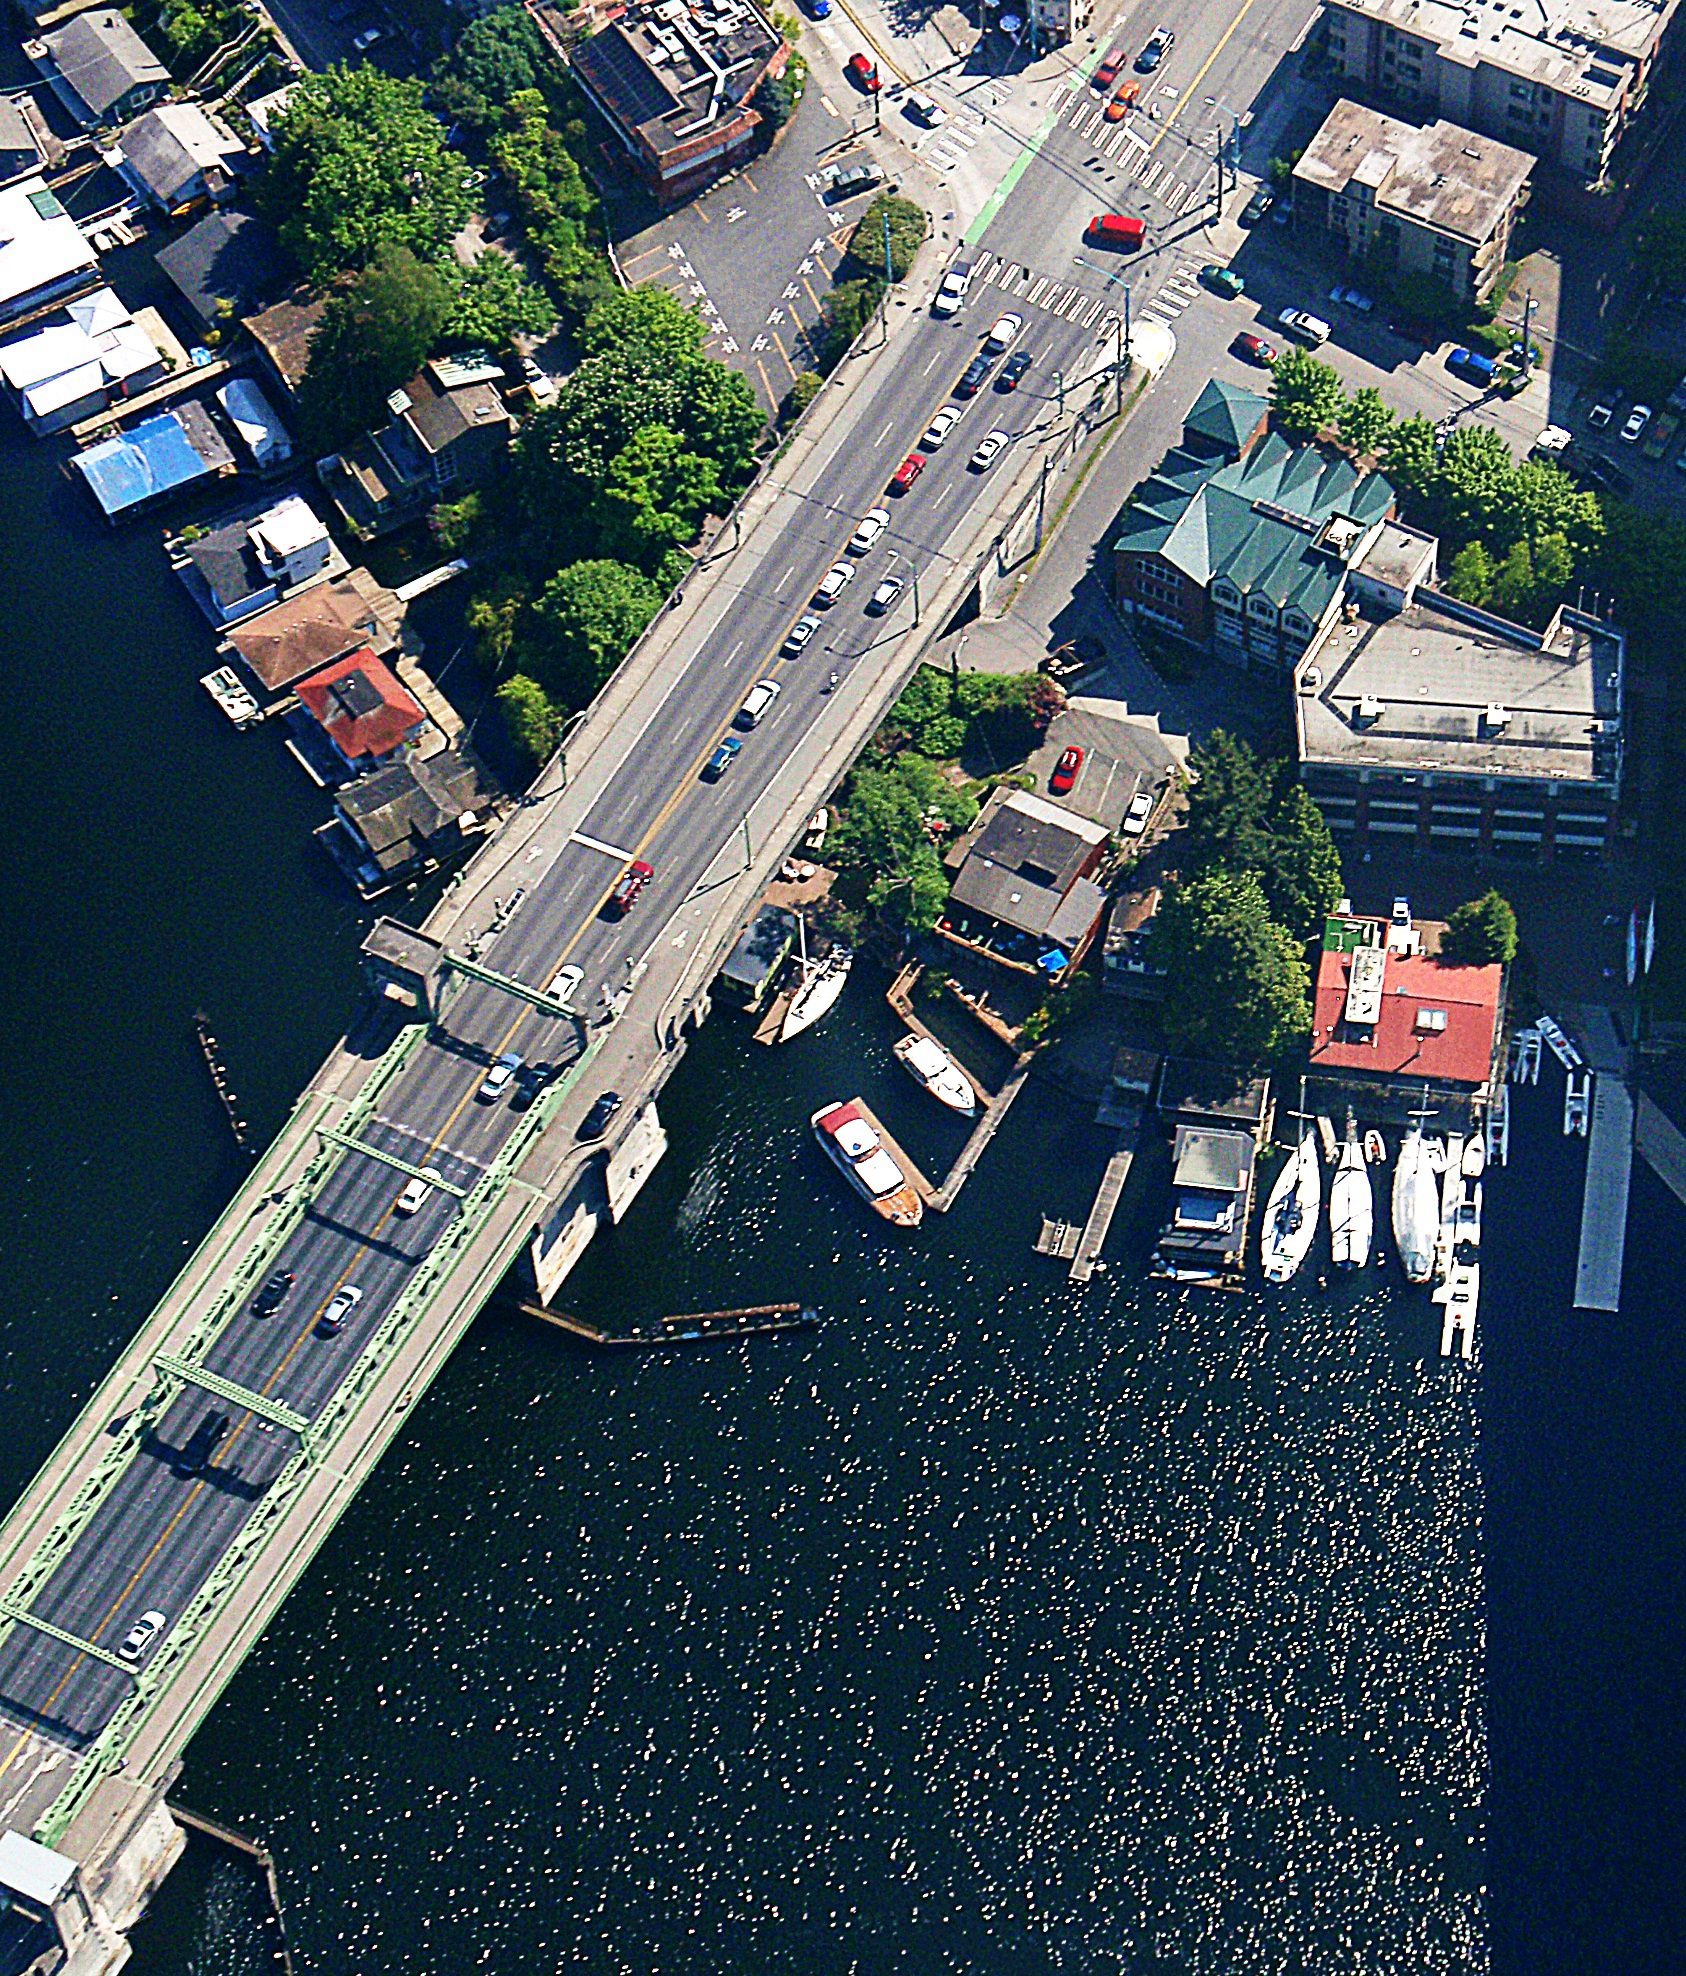 Aerial photo of the University Bridge with traffic flowing across the Ship Canal in May 2012. The bridge is visible to the lefthand side of the photo, with a number of boats and buildings visible near the top. Sunlight reflects back off of the water in the lower righthand side of the image.